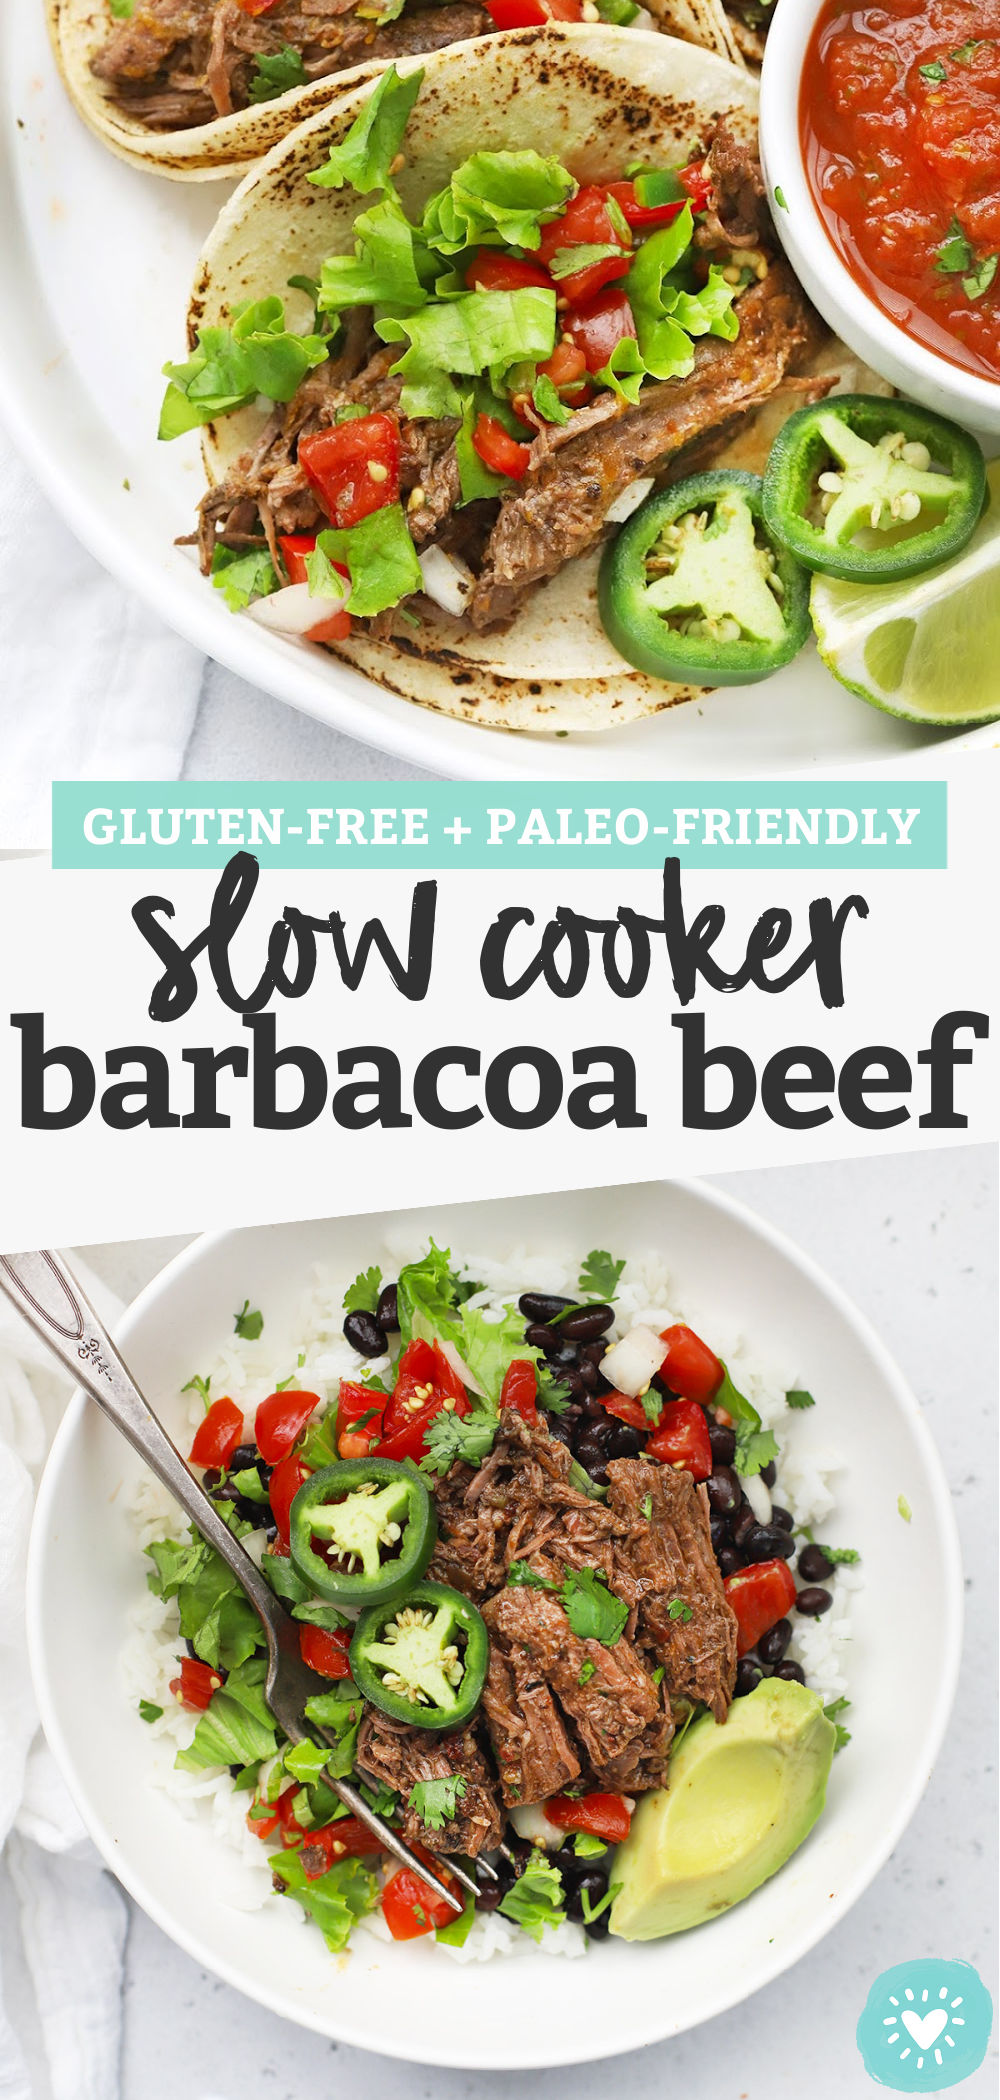 Slow Cooker Barbacoa Beef - Tender slow-cooker barbacoa beef makes the most amazing tacos, burritos, burrito bowls, nachos, and more! (Gluten-Free) // Barbacoa Beef Tacos // Crock pot barbacoa beef // Barbacoa beef burrito bowls // Paleo barbacoa beef #glutenfree #tacos #burritobowls #texmex #slowcooker #crockpot